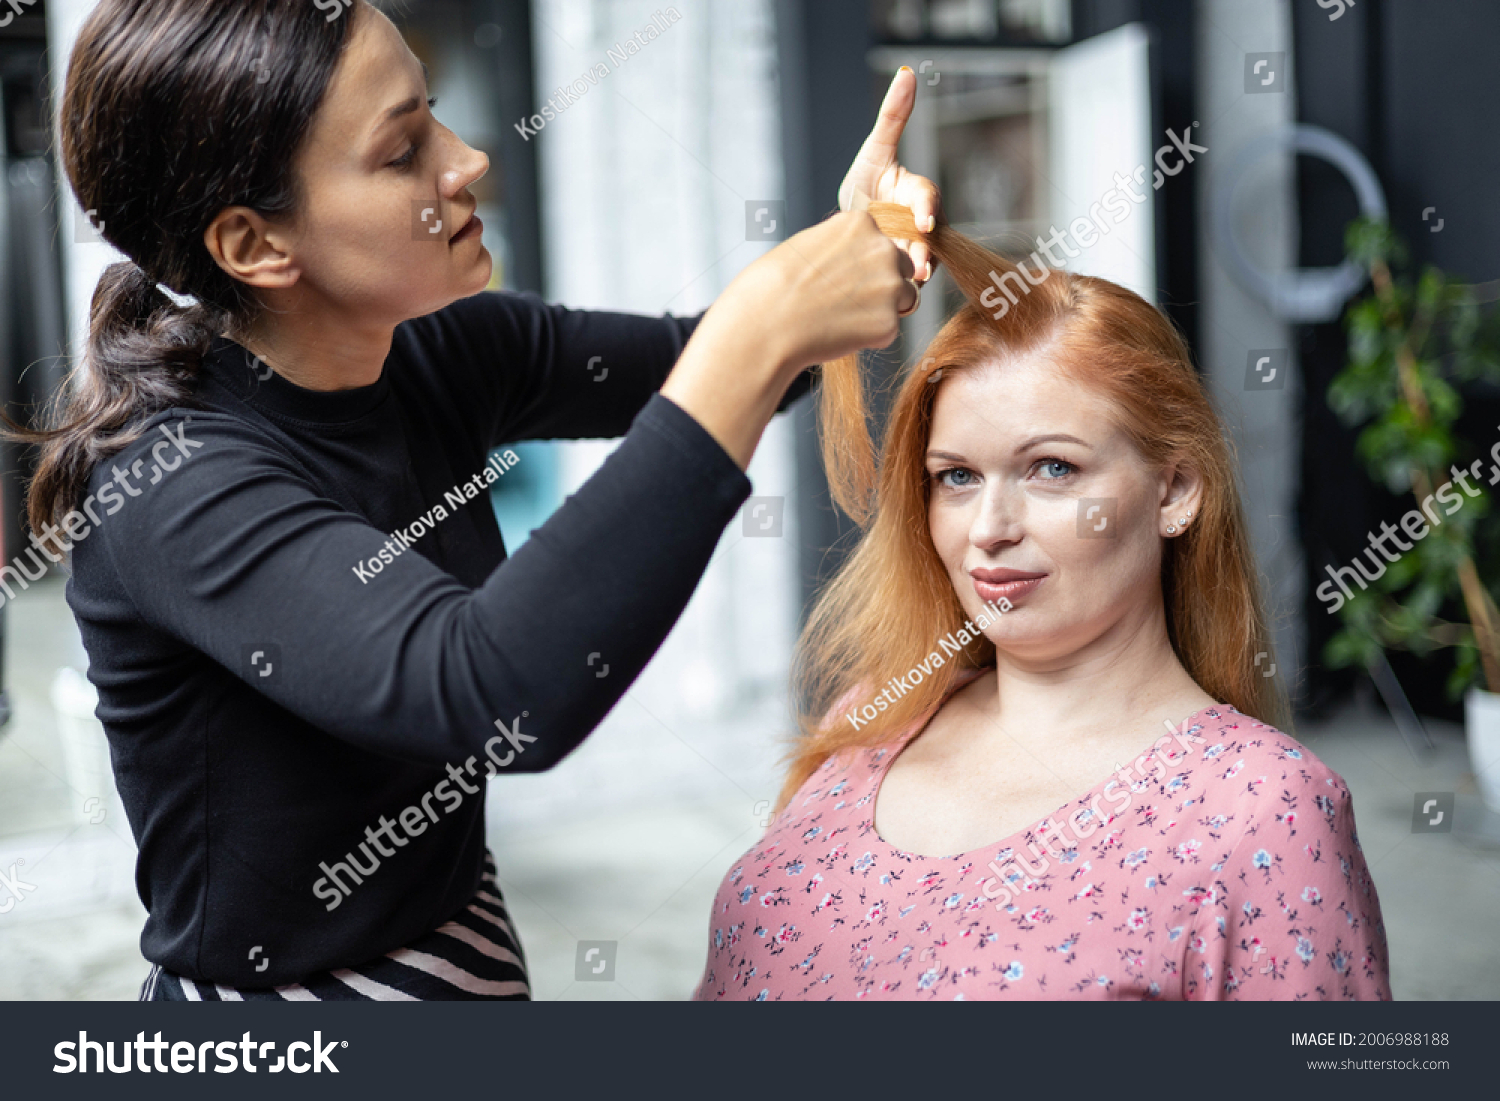 Professional female makeup artist applying cosmetics on model face use brush working at beauty salon. Woman visagist make up master dyeing facial visage to client appearance makeover #2006988188